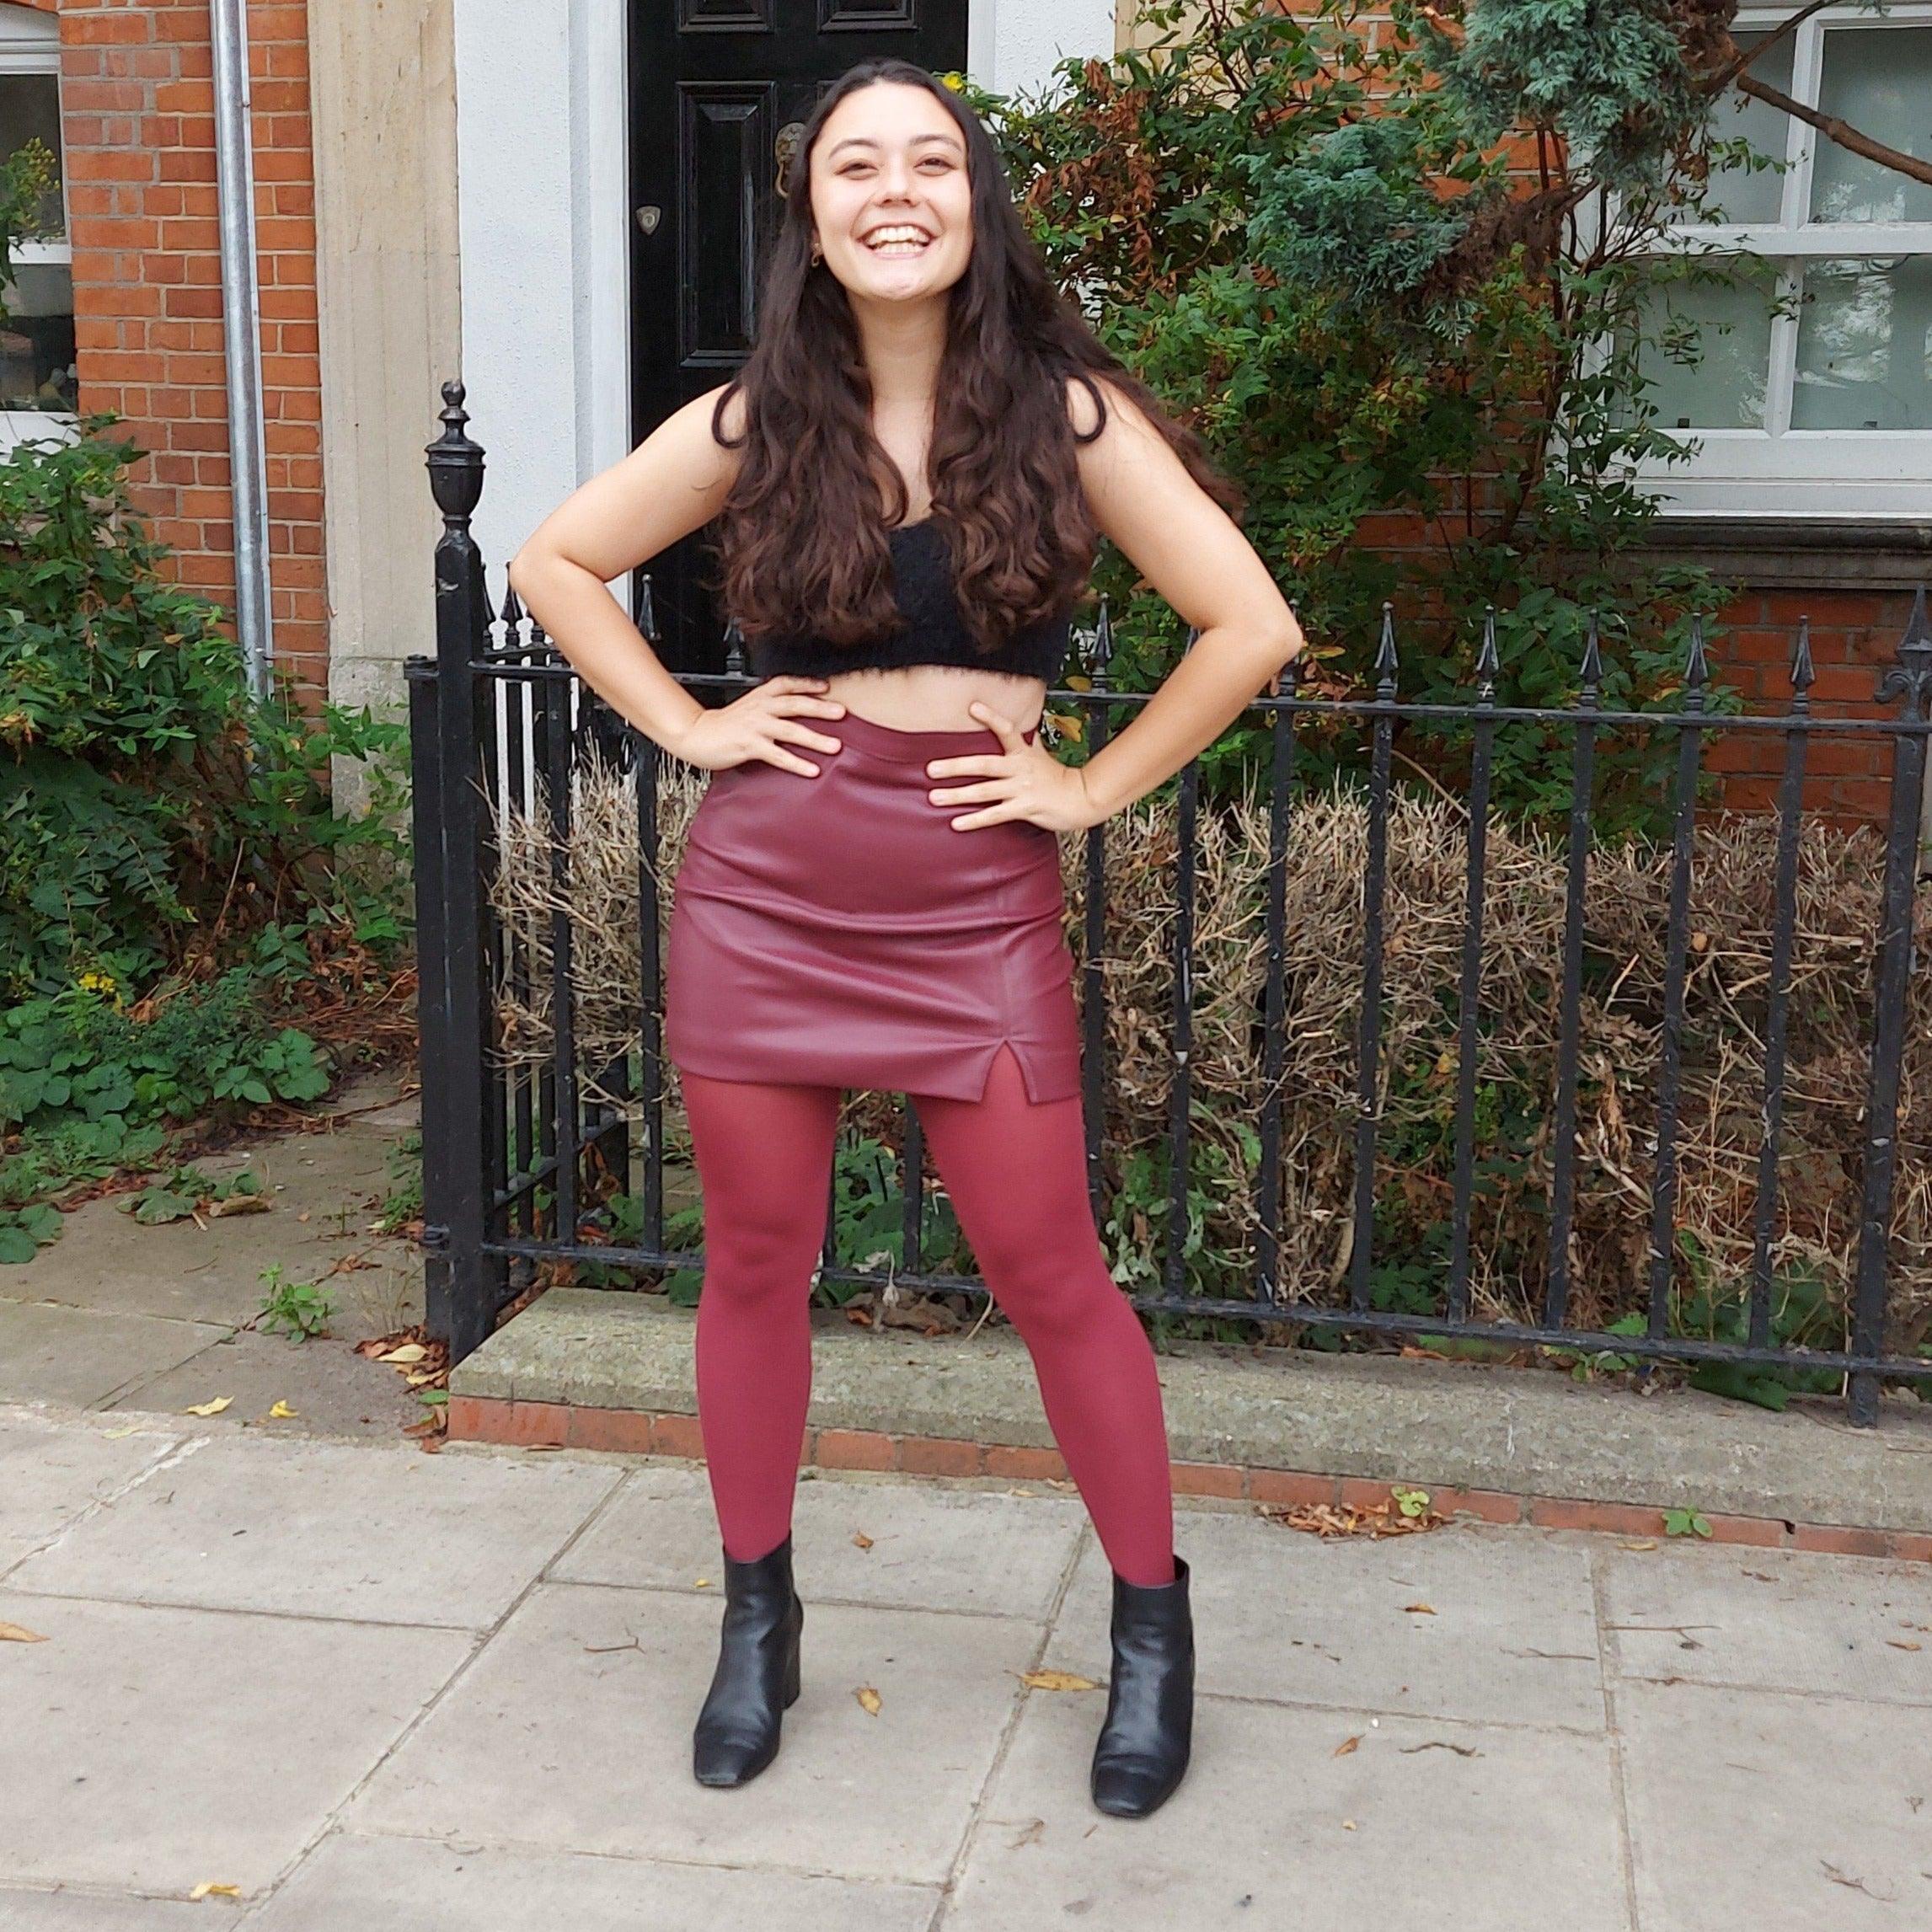 Shop the Latest Collection of Maroon Tights